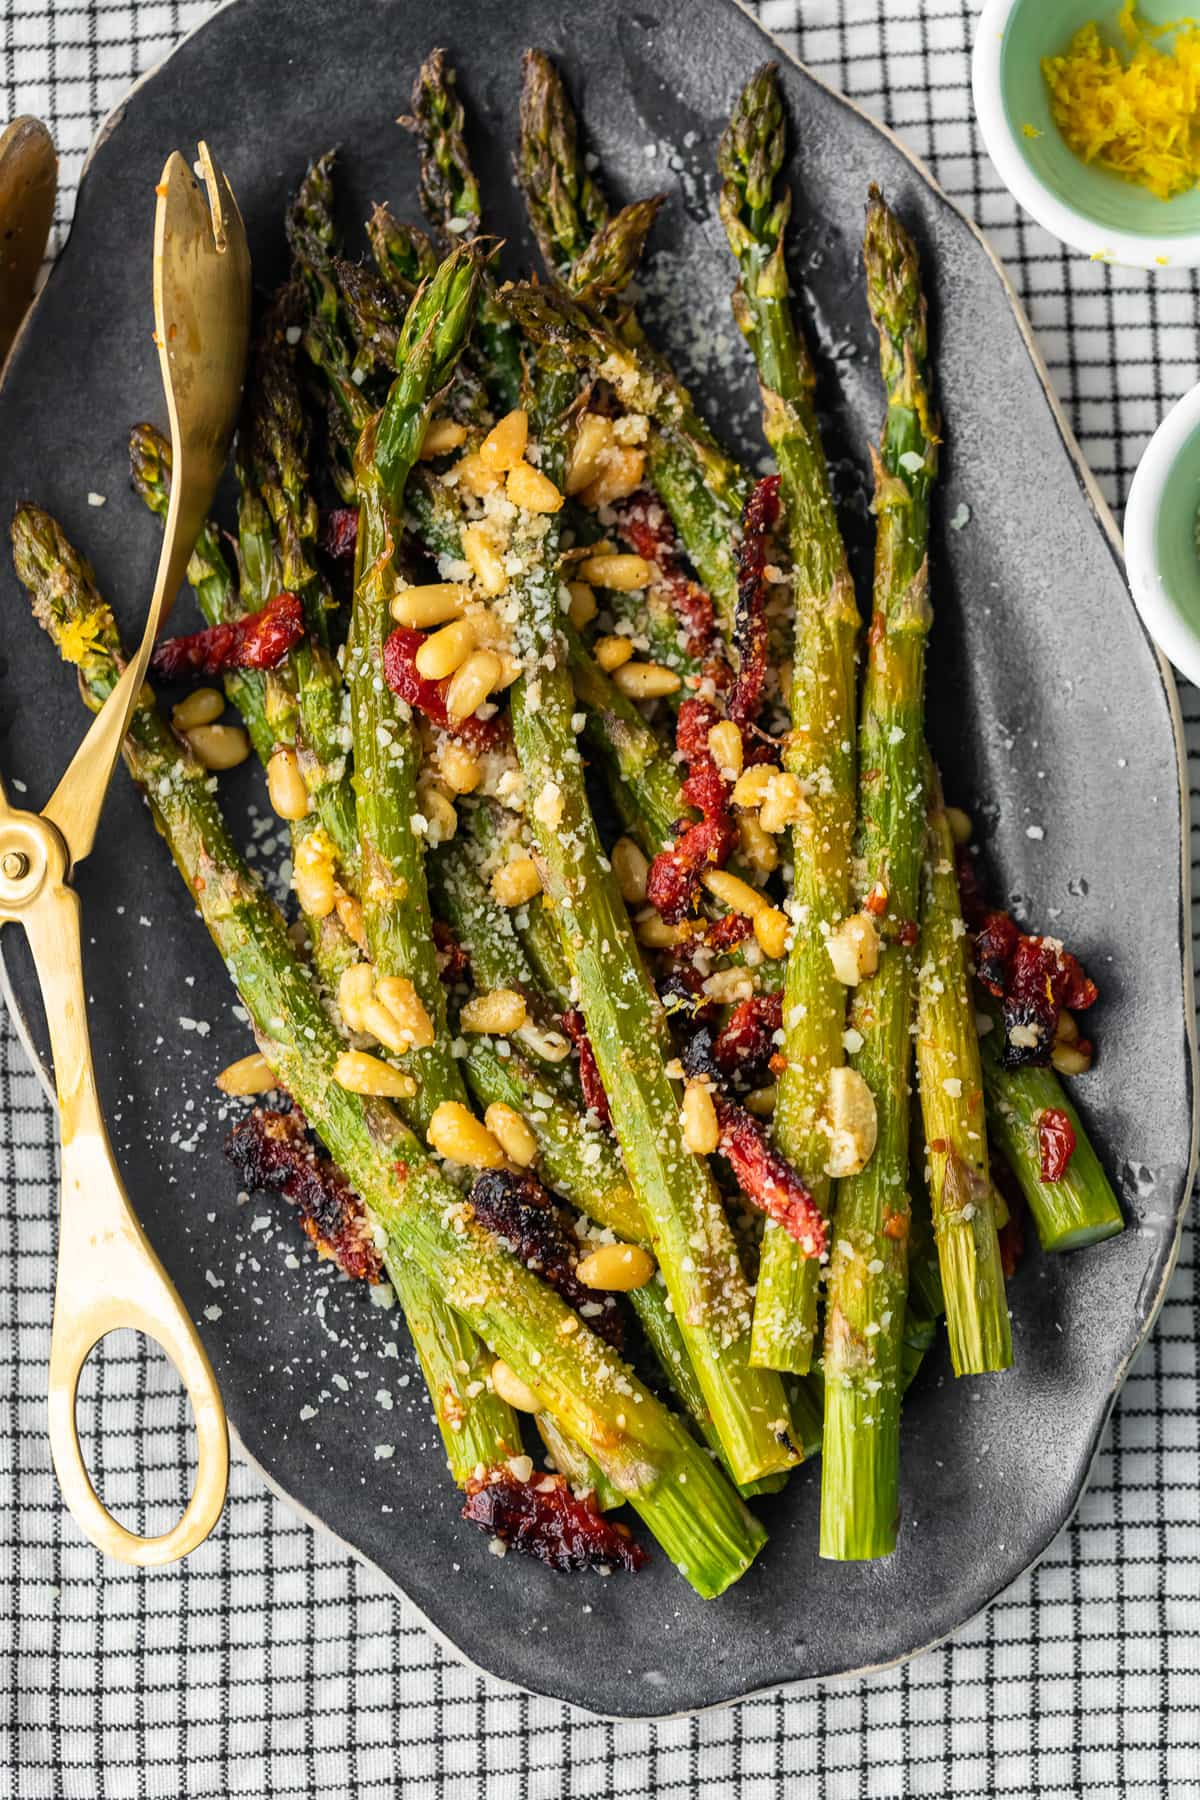 Asparagus Side Dish
 Oven Roasted Asparagus Recipe with Sun Dried Tomatoes